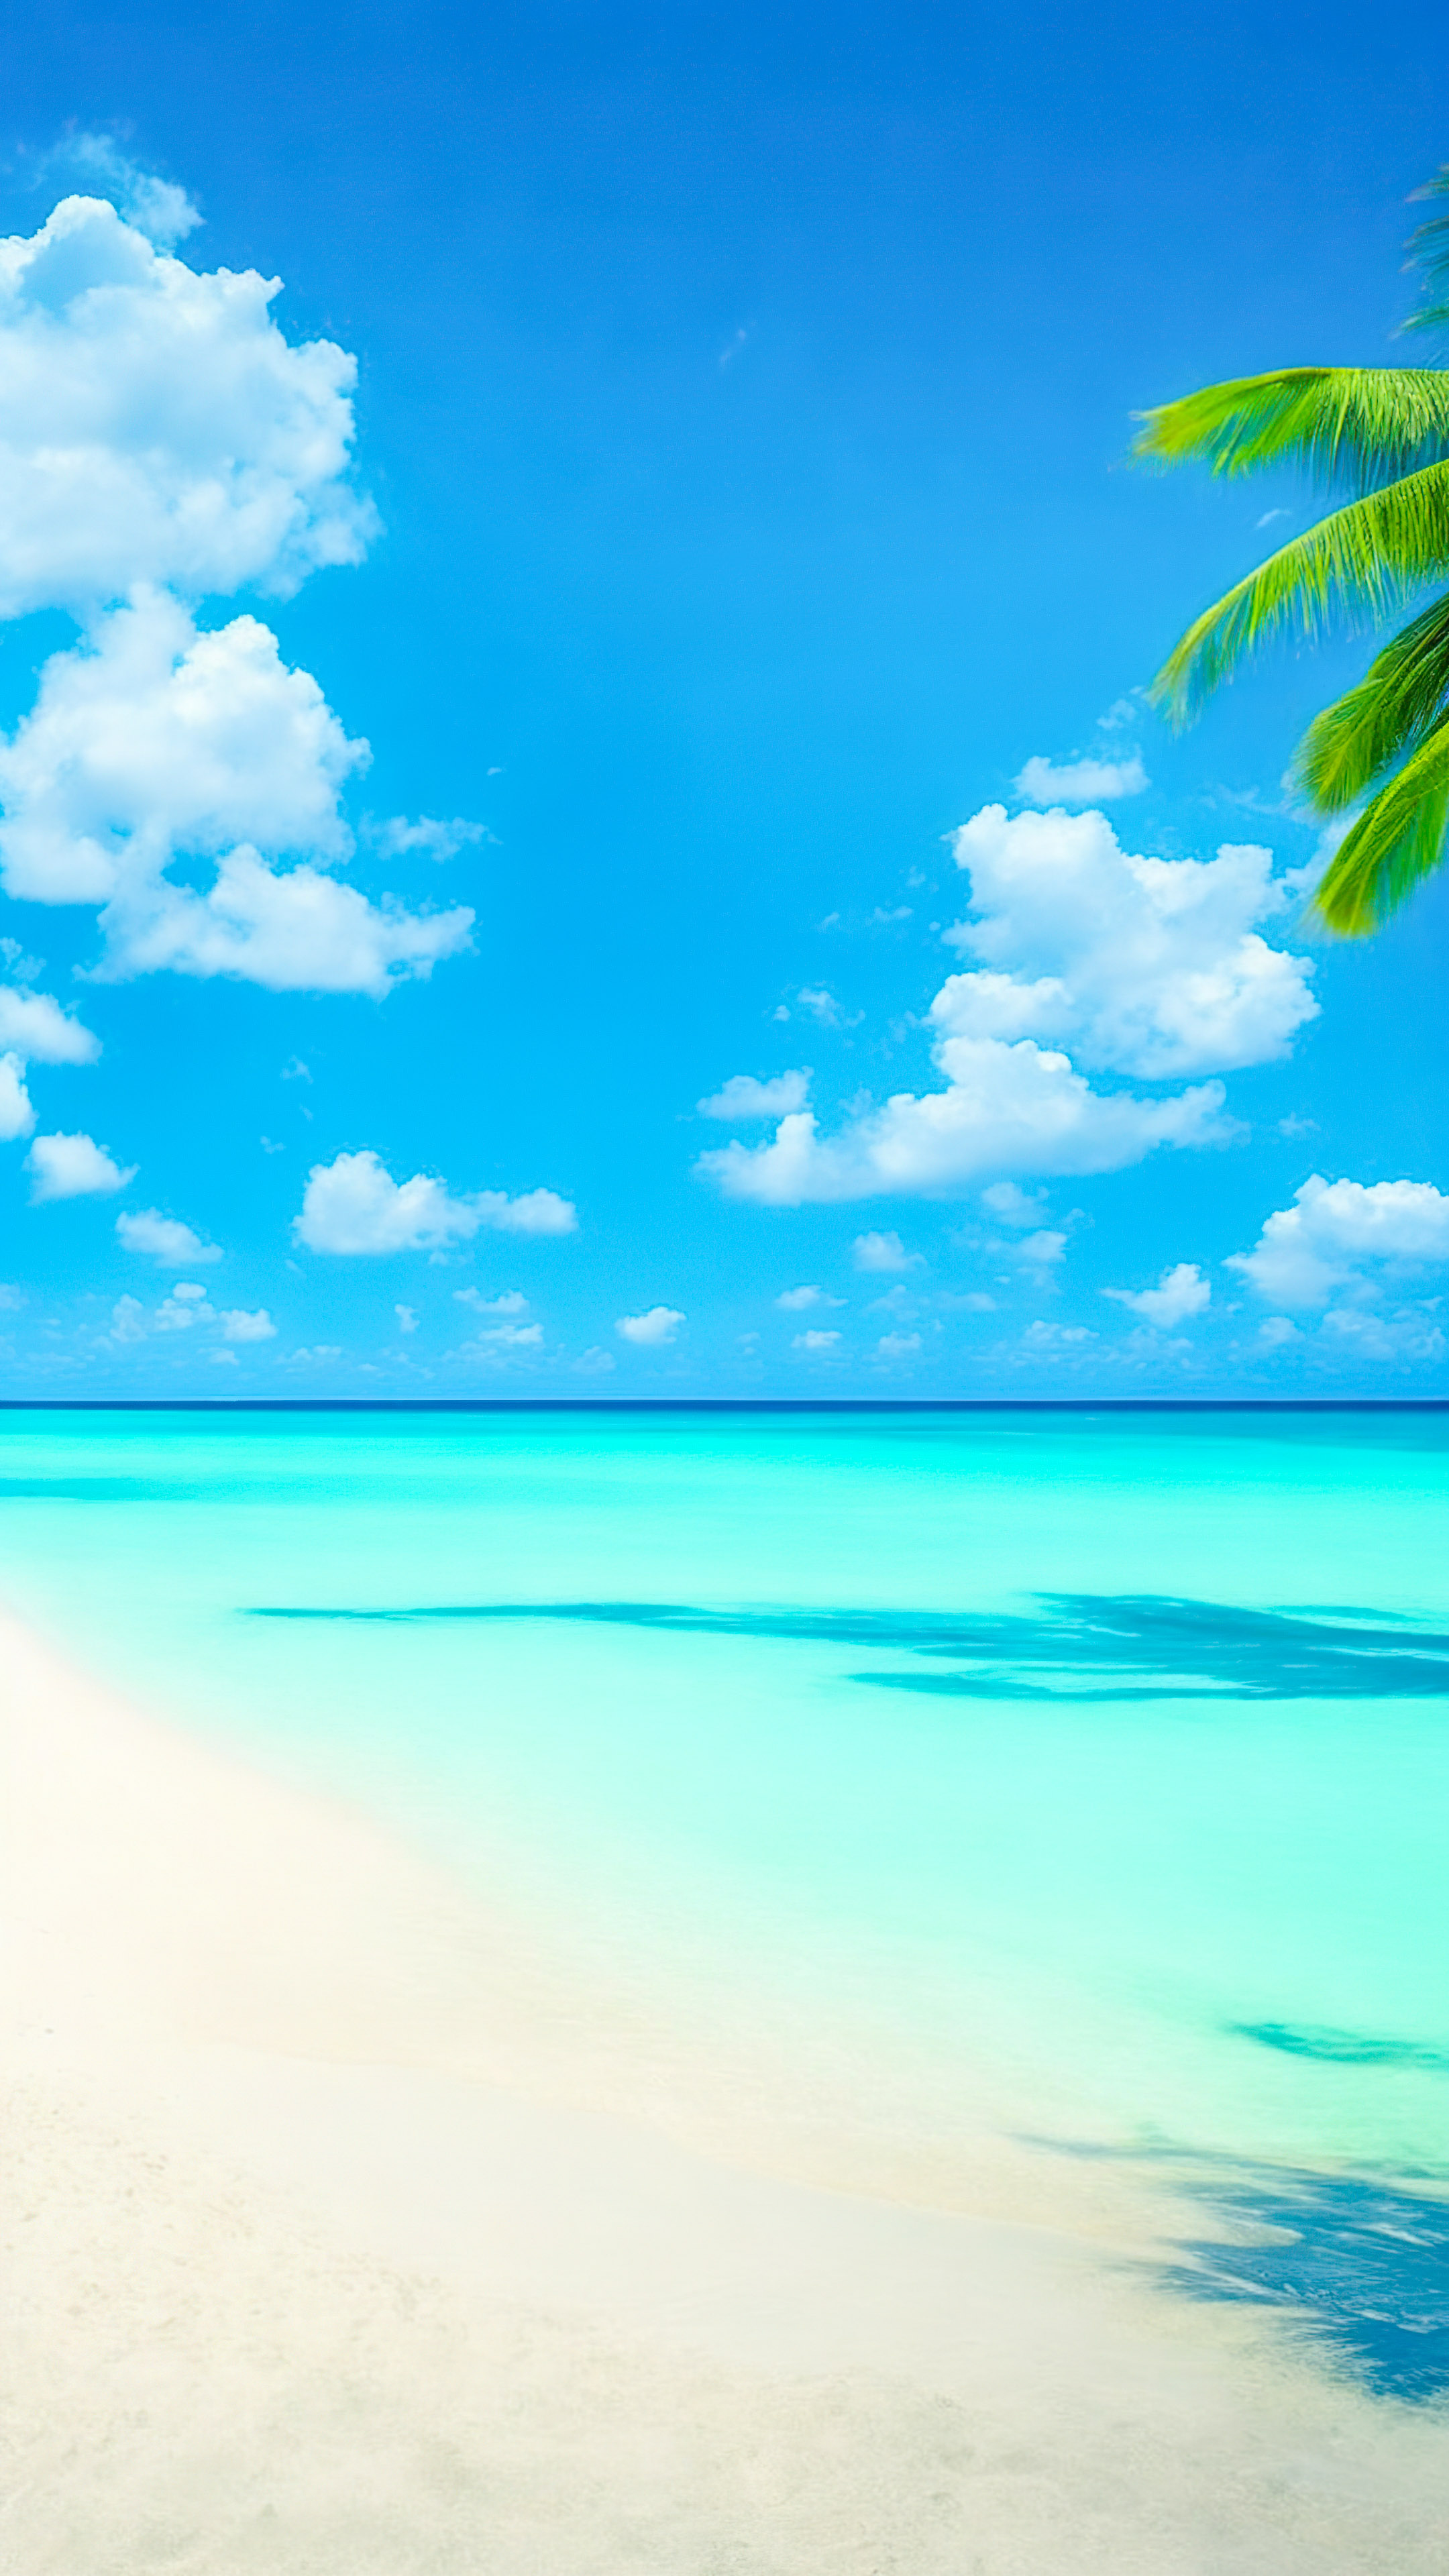 Dive into the tranquility of our beautiful full-screen nature wallpaper, featuring a coastal paradise with pristine sandy beaches, turquoise waters, and a cloudless sky.